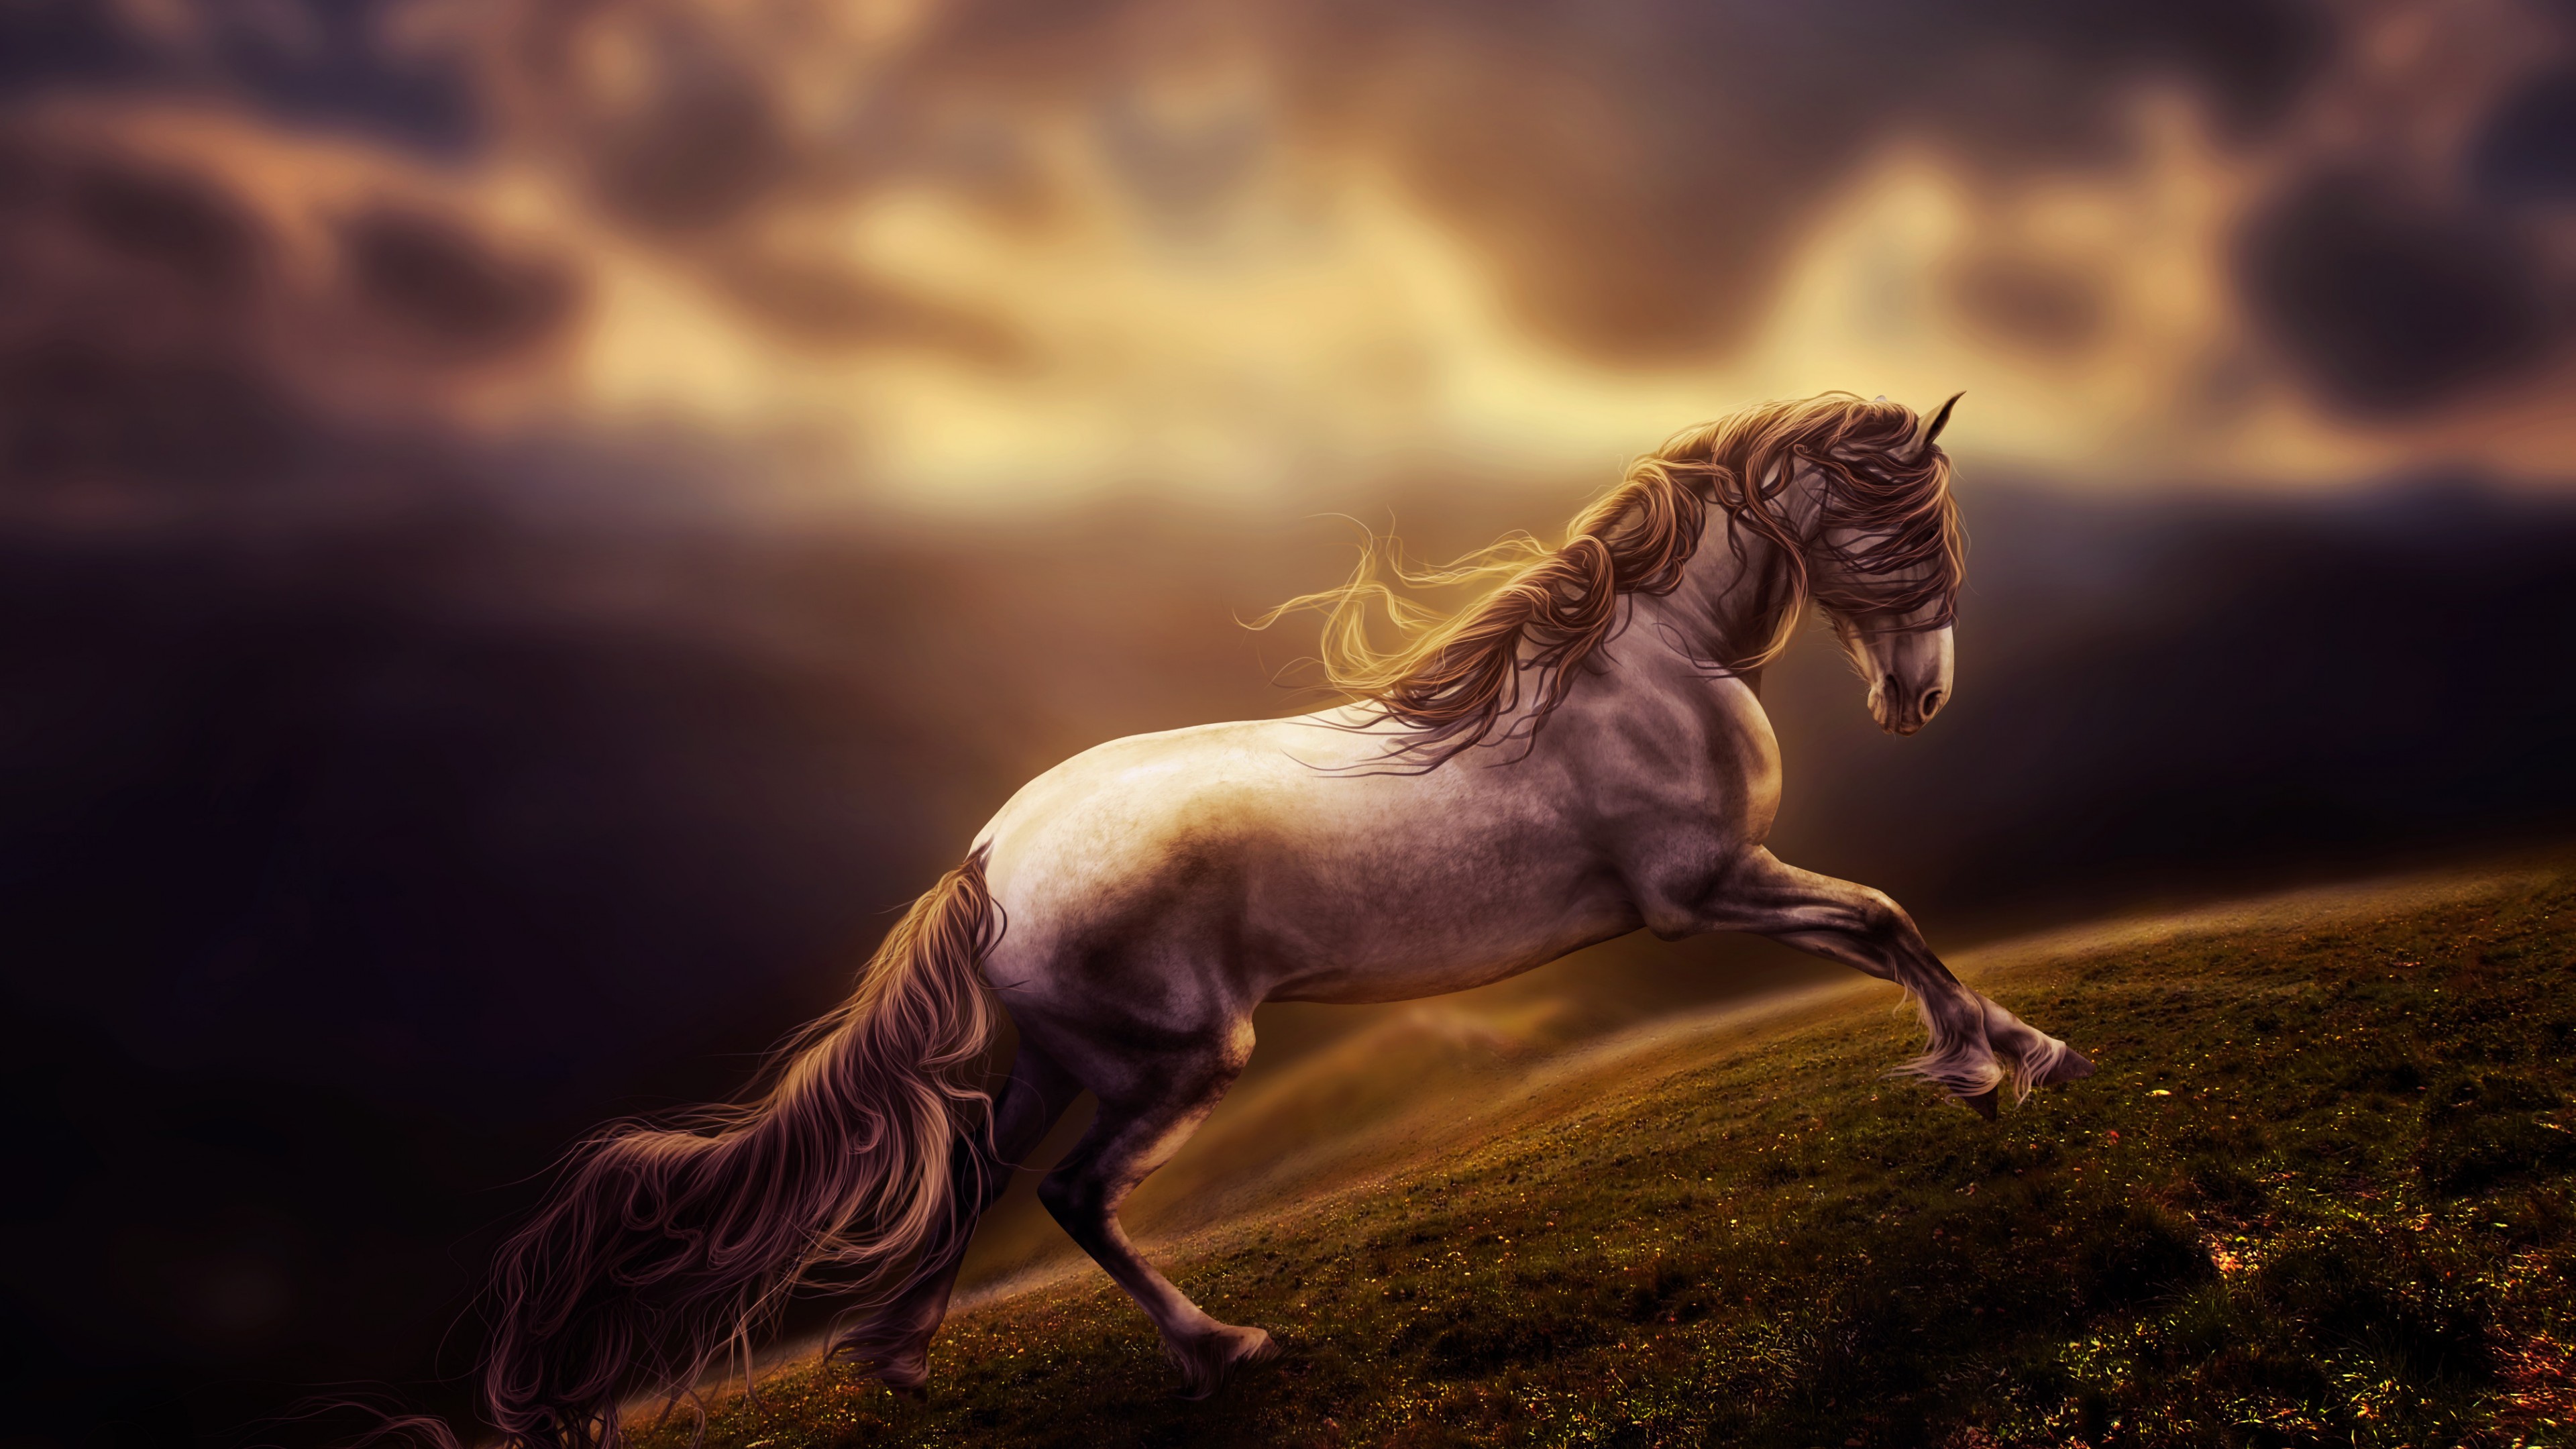 100+] White Horse Wallpapers | Wallpapers.com